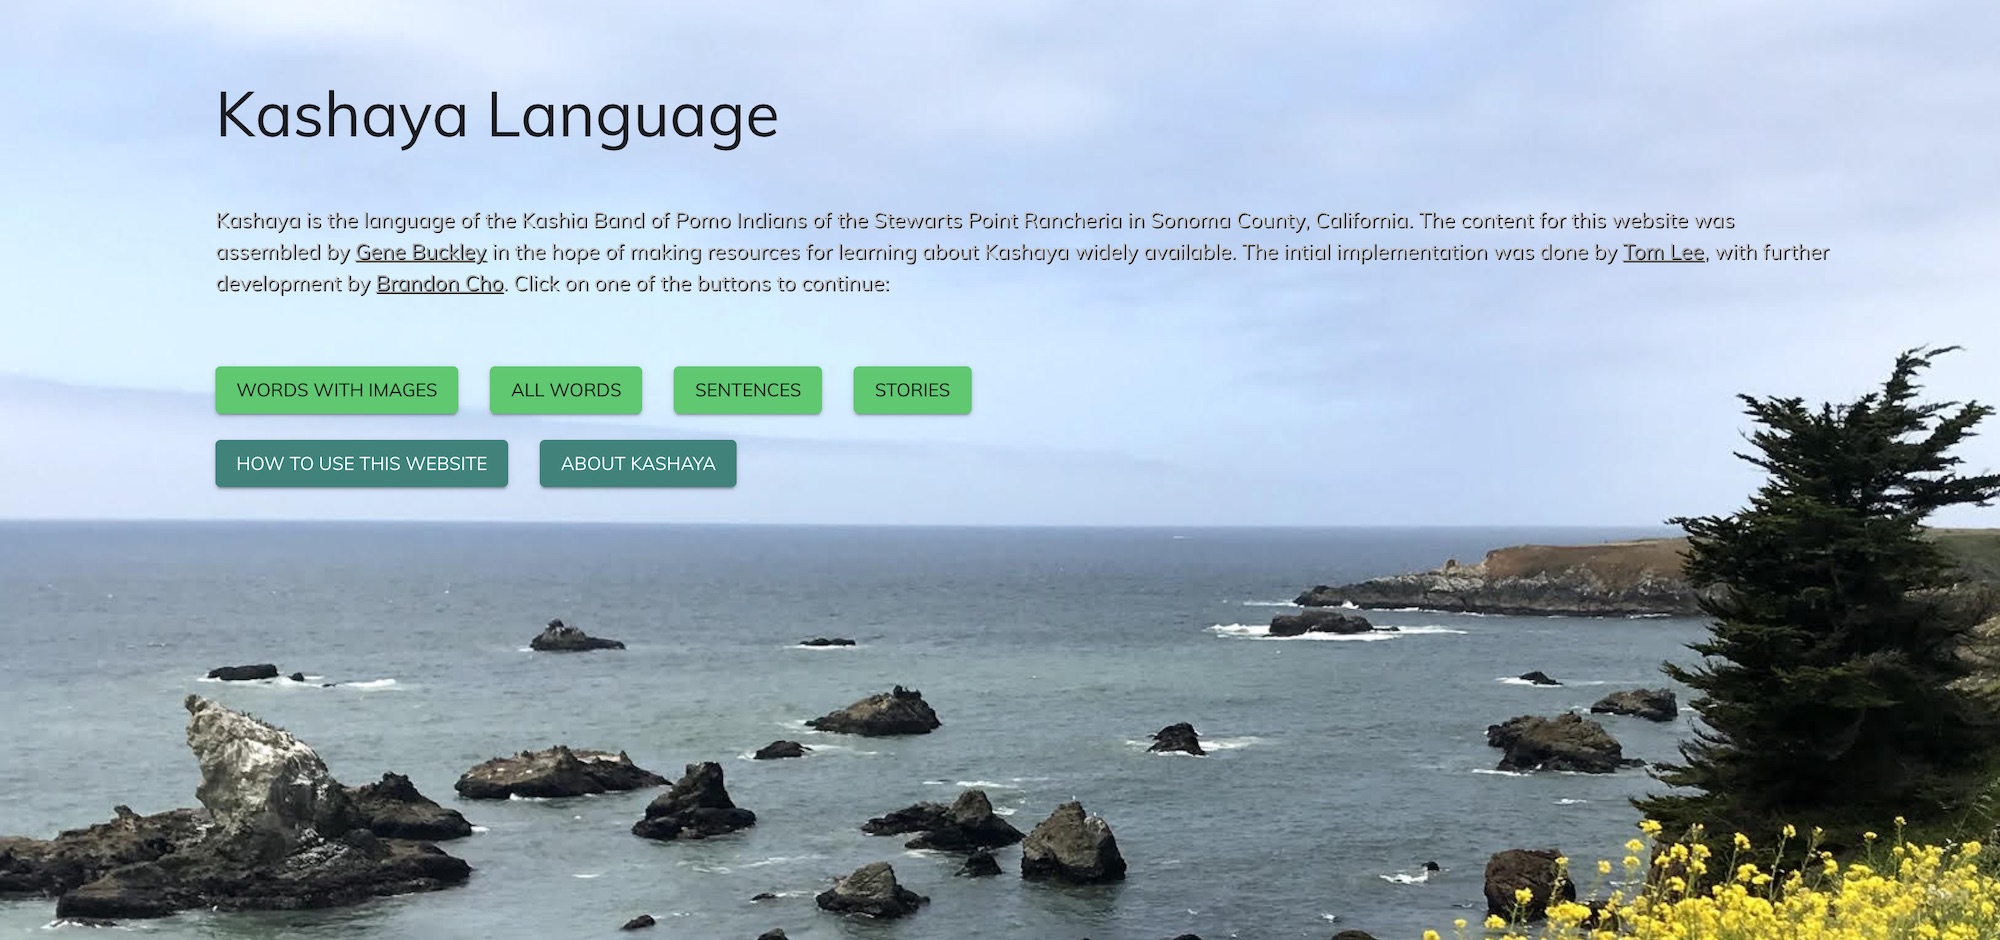 Kashaya Language: Kashaya is the language of the Kashia Band of Pomo Indians of the Stewarts Point Rancheria in Sonoma County, California. The content for this website was assembled by Gene Buckley in the hope of making resources for learning about Kashaya widely available. The initial implementation was done by Tom Lee, with further development by Brandon Cho. Click on one of the buttons to continue. Words with Images. All Word. Sentences. Stories. How to use this website. About Kashaya. 